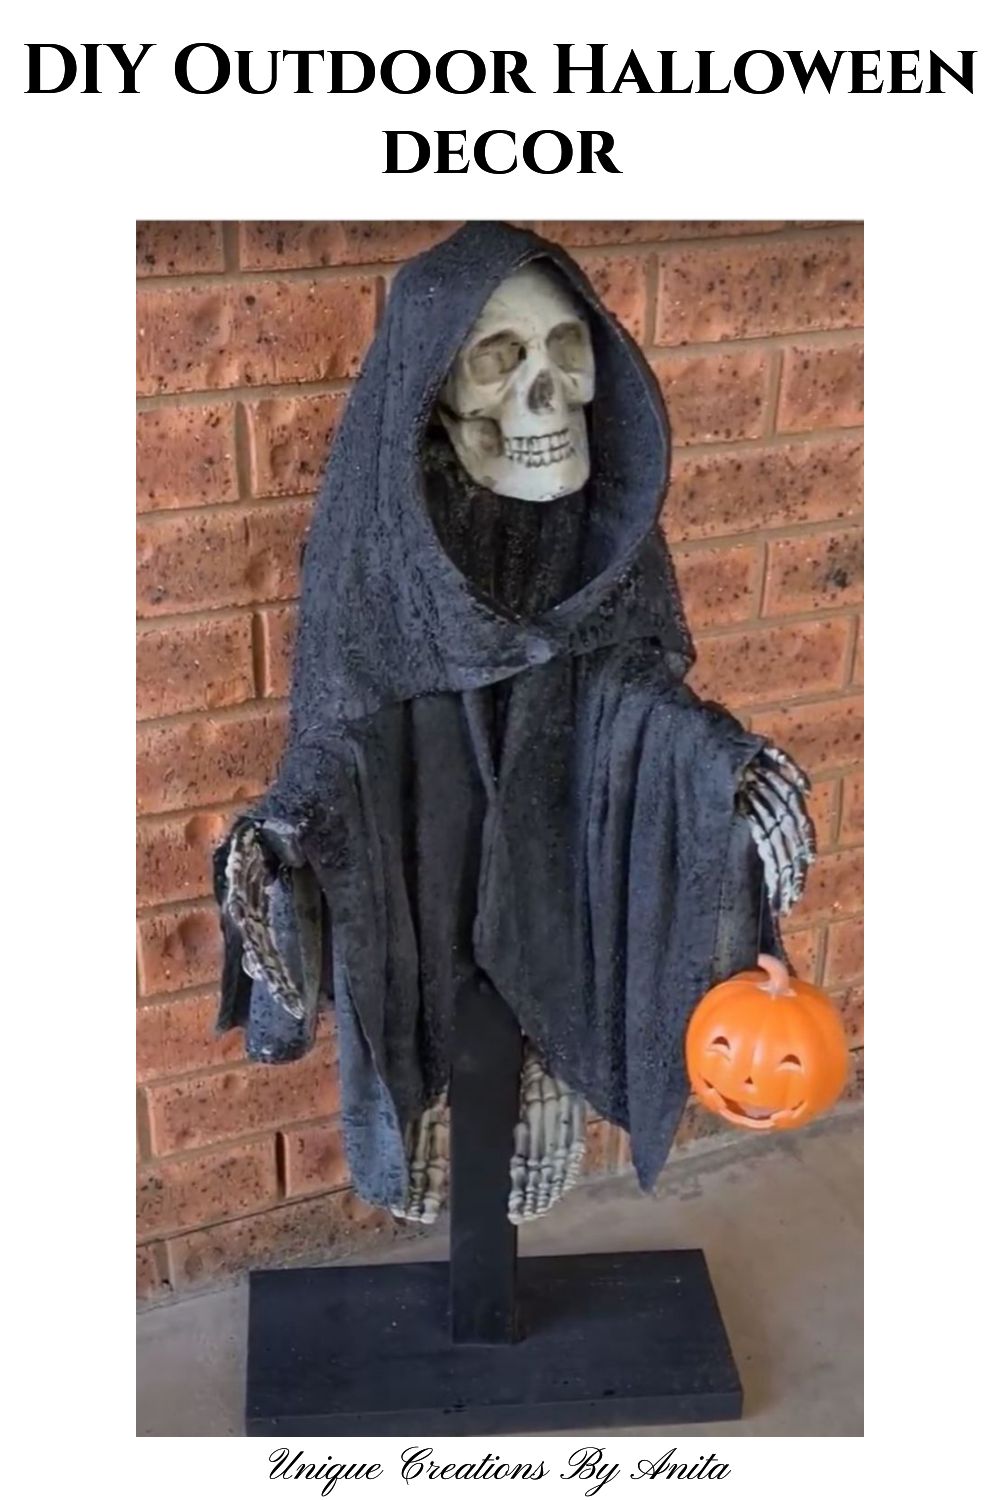 How to make your own grim reaper using cement and an old towel.